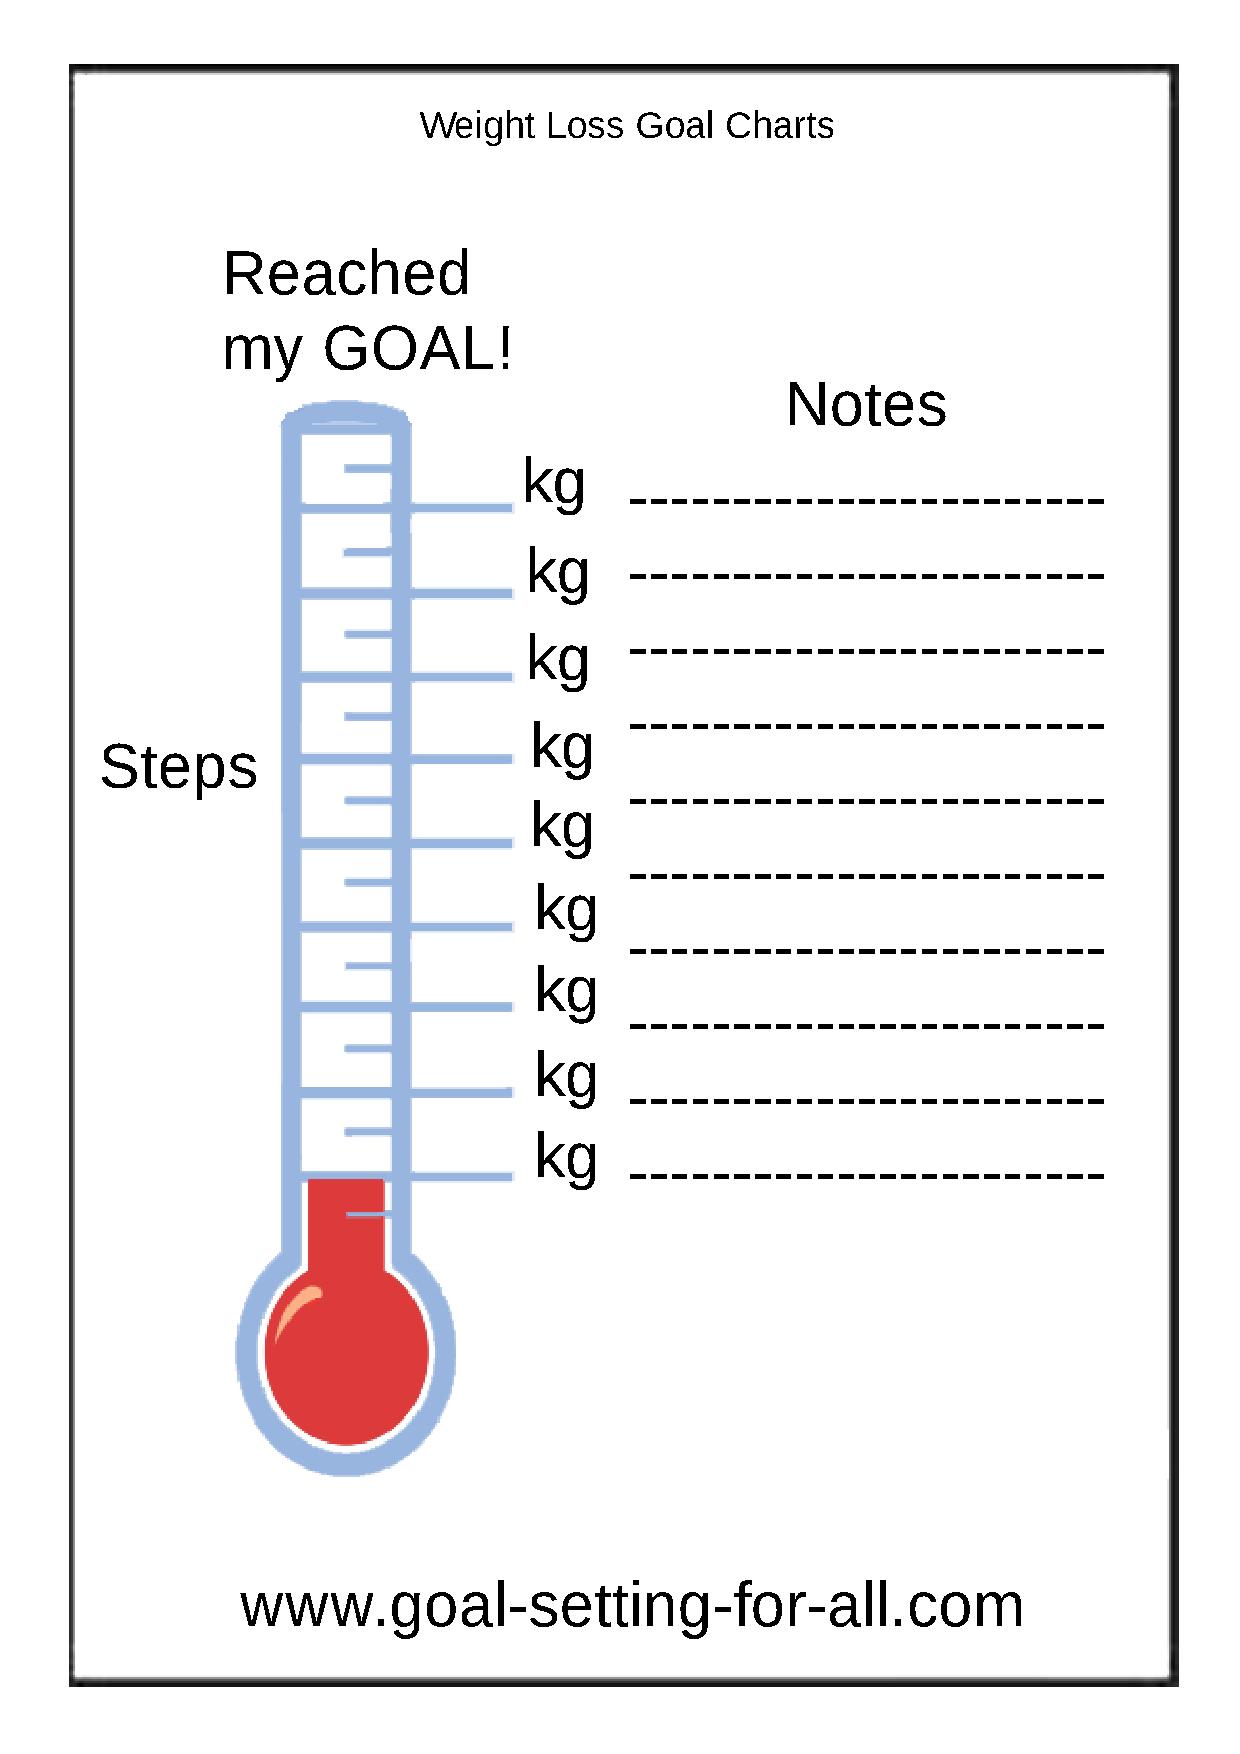 Weight Loss Goal Charts to Track Your Great Progress in Weight Loss